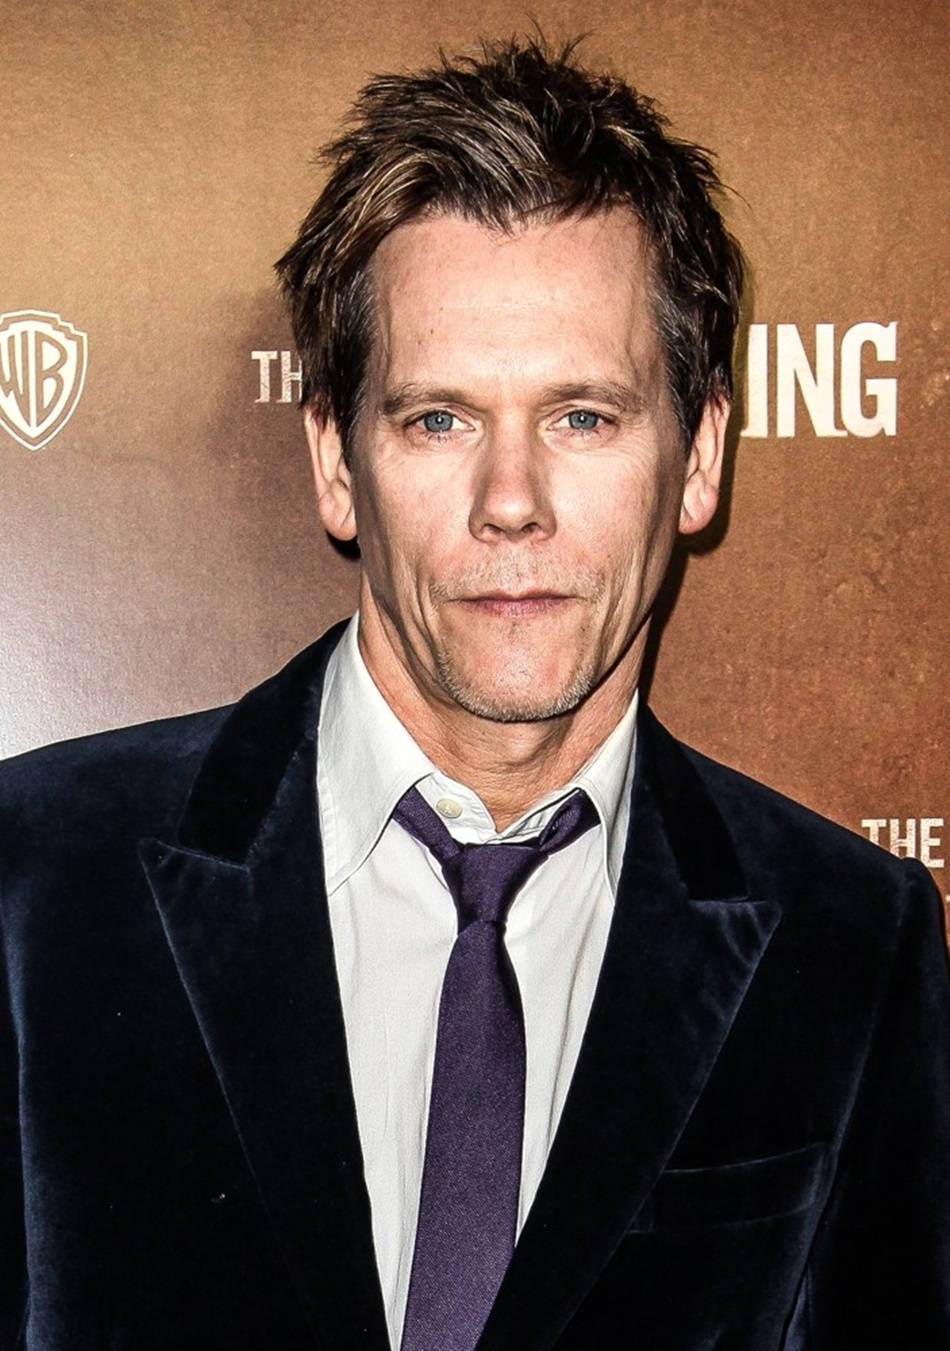 Legendary actor Kevin Bacon at a Warner Bros event Wallpaper